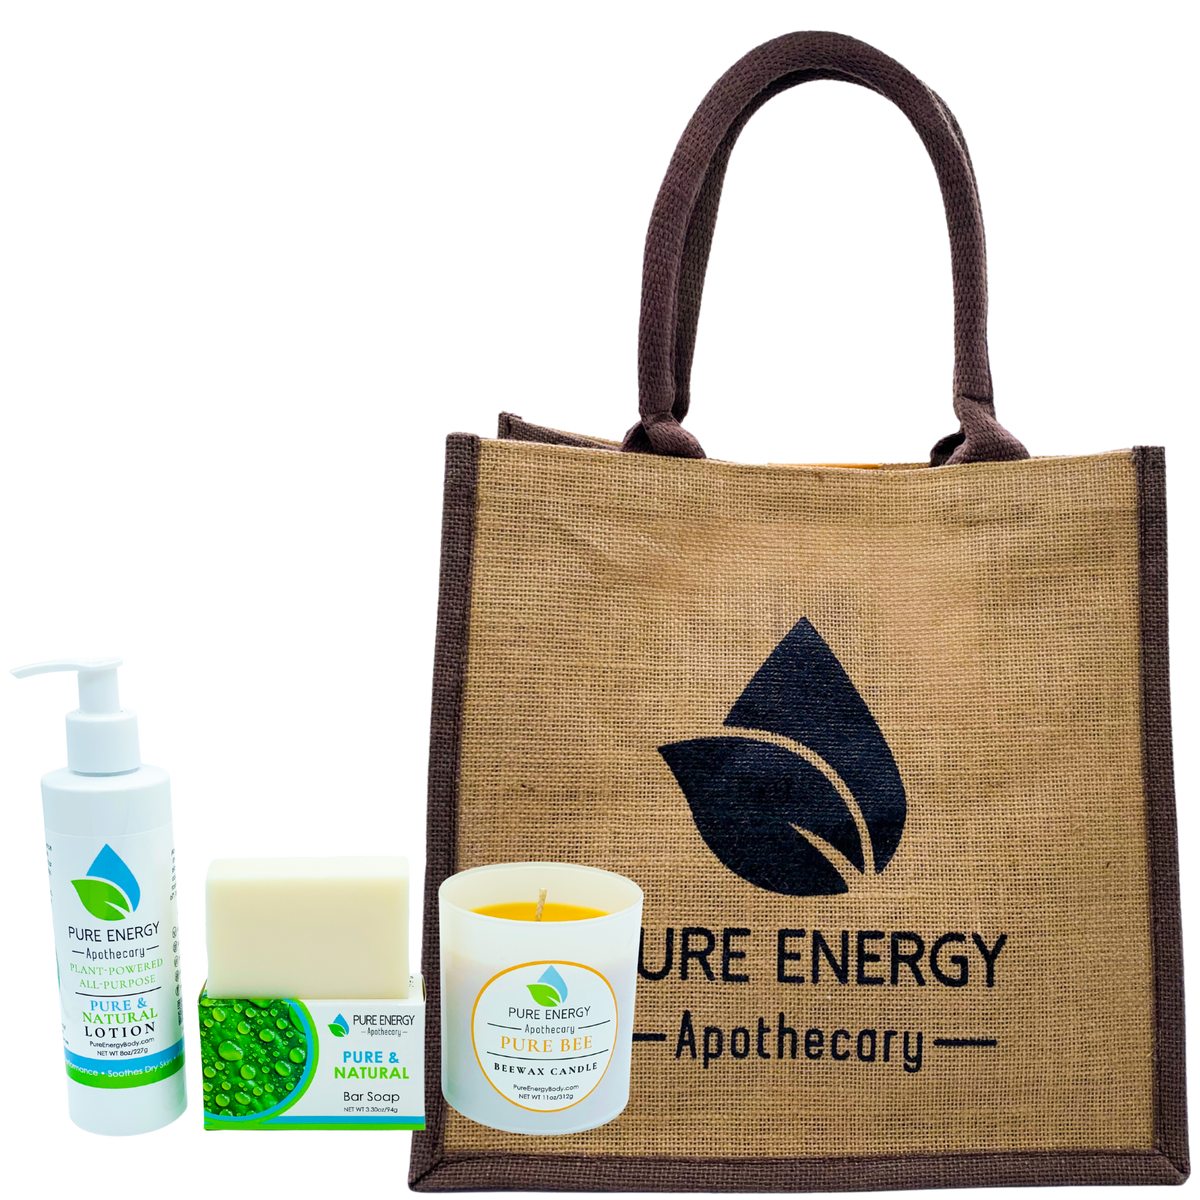 Nourishing Balance Gift Set (Pure & Natural) by Pure Energy Apothecary